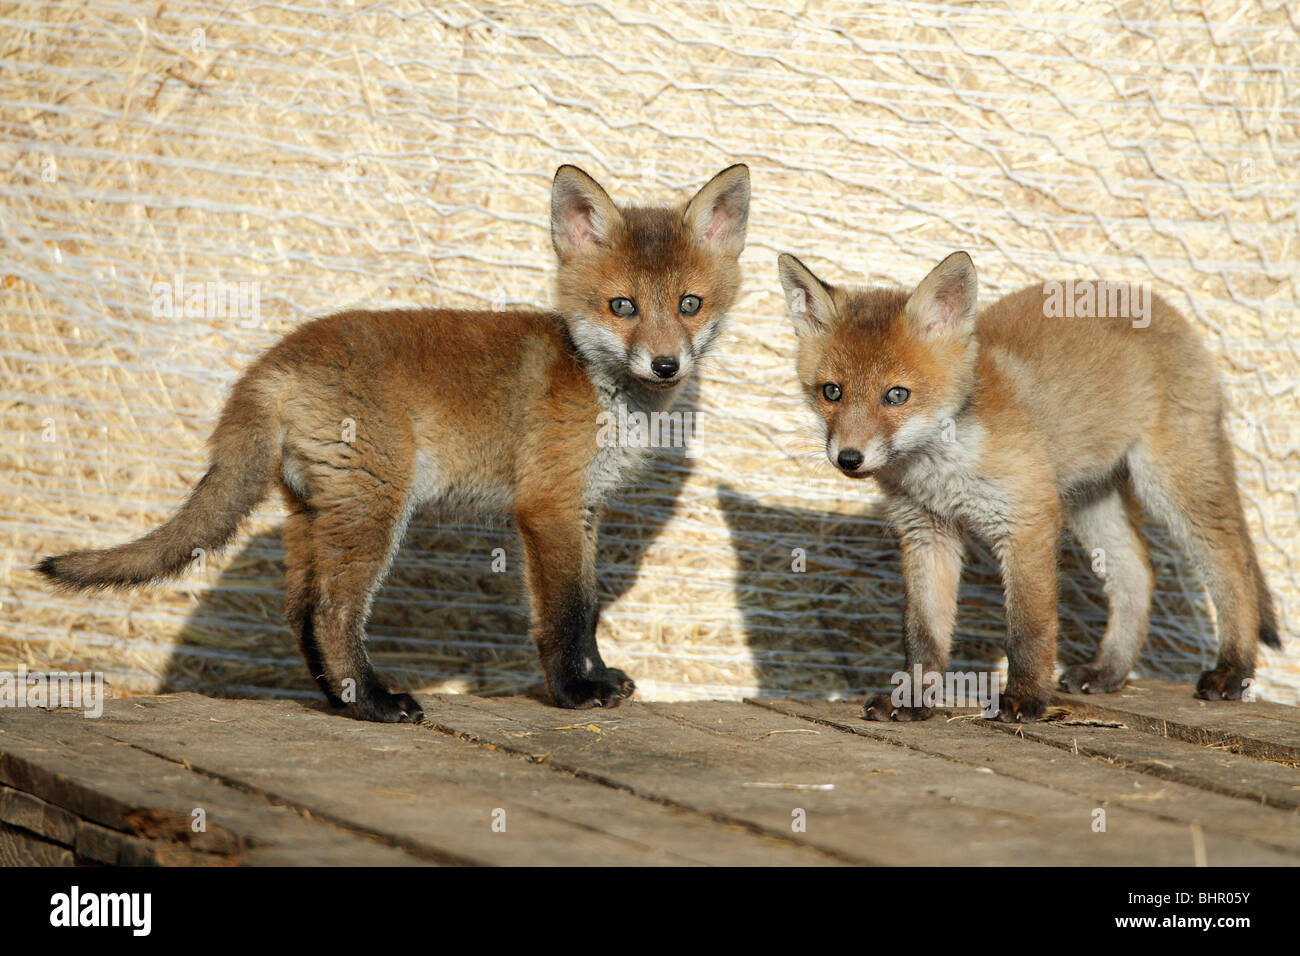 European Red Fox (Vulpes vulpes), two cubs in barn, Hessen, Germany Stock Photo